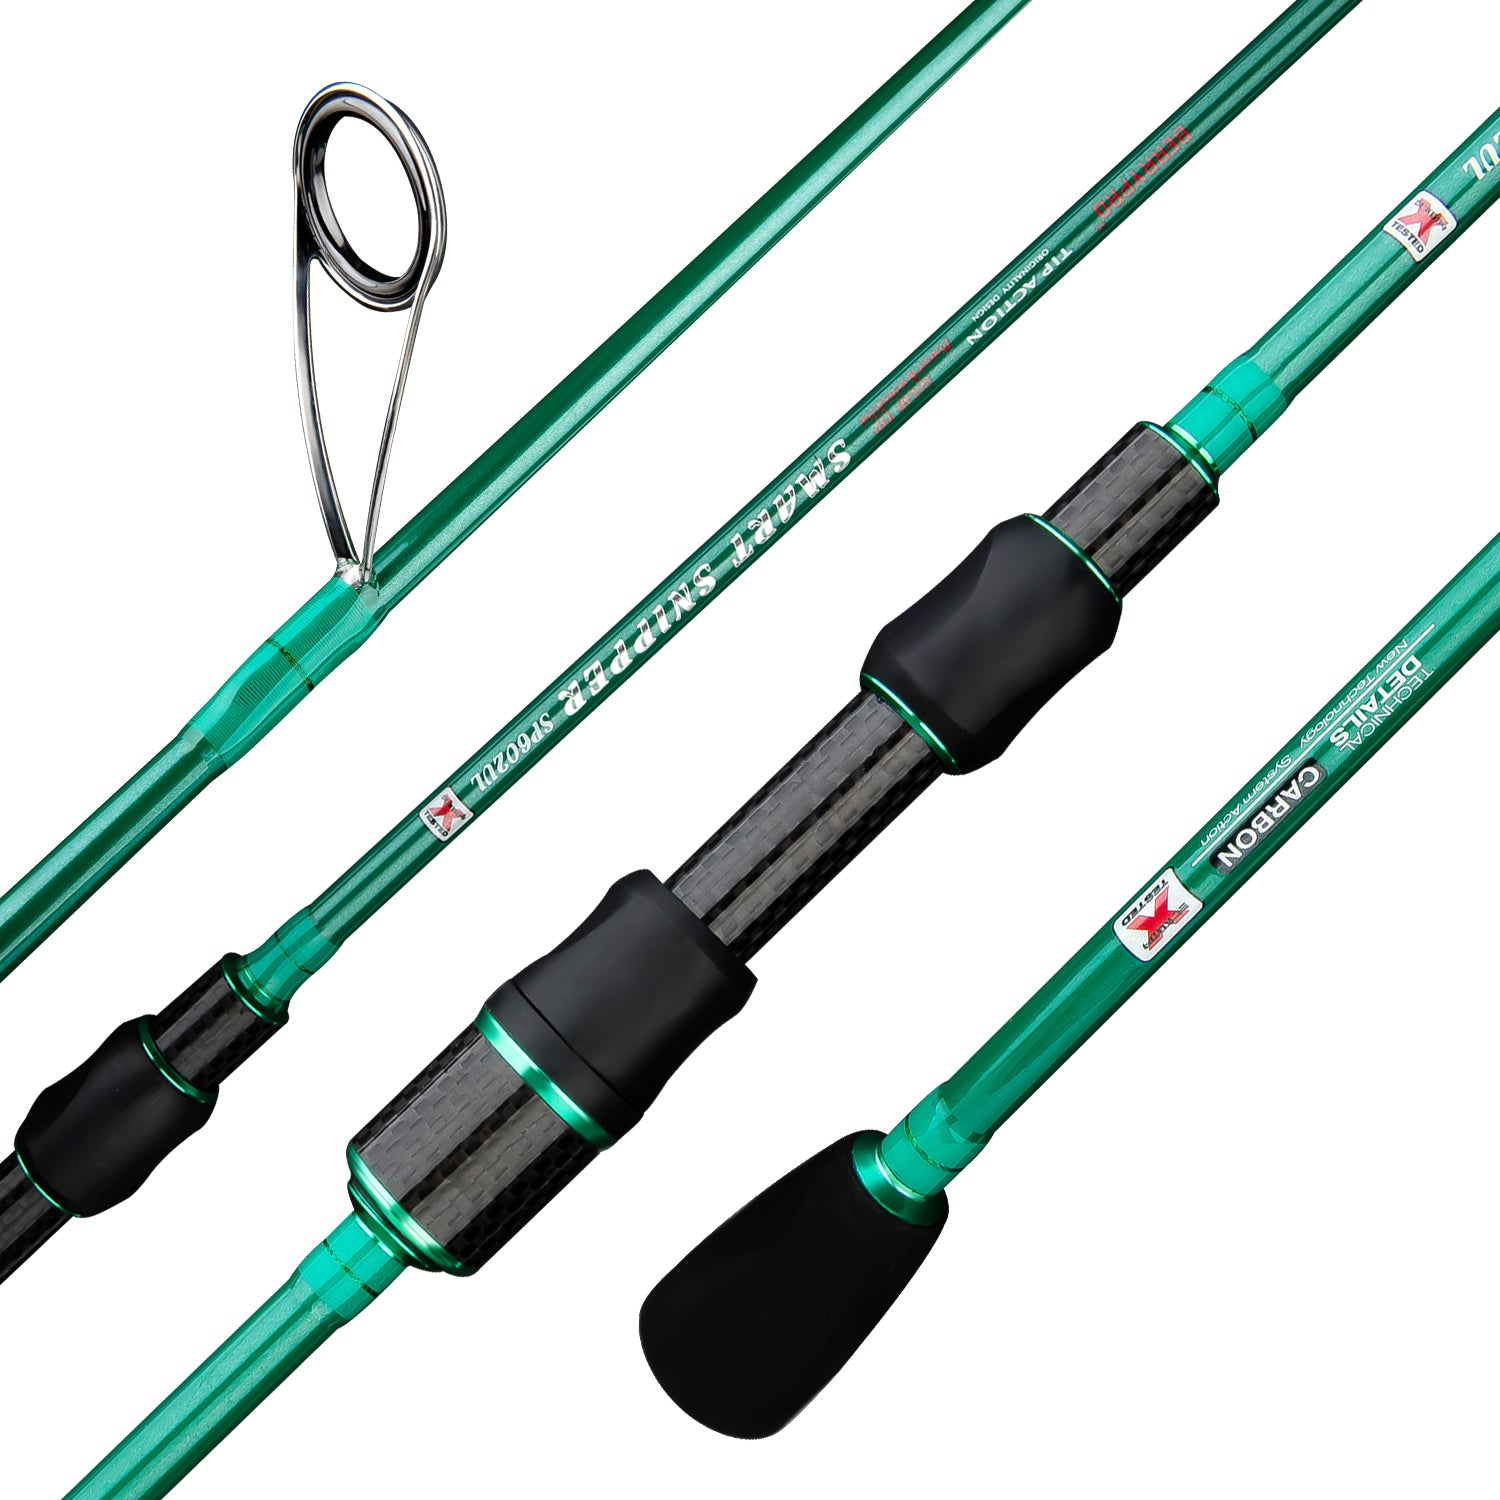 Telescopic Ultralight Spinning Rod Combo With Reel Full Kit, 15M/24M  Wheels, Portable Travel Spinning Rods From Debf, $16.1